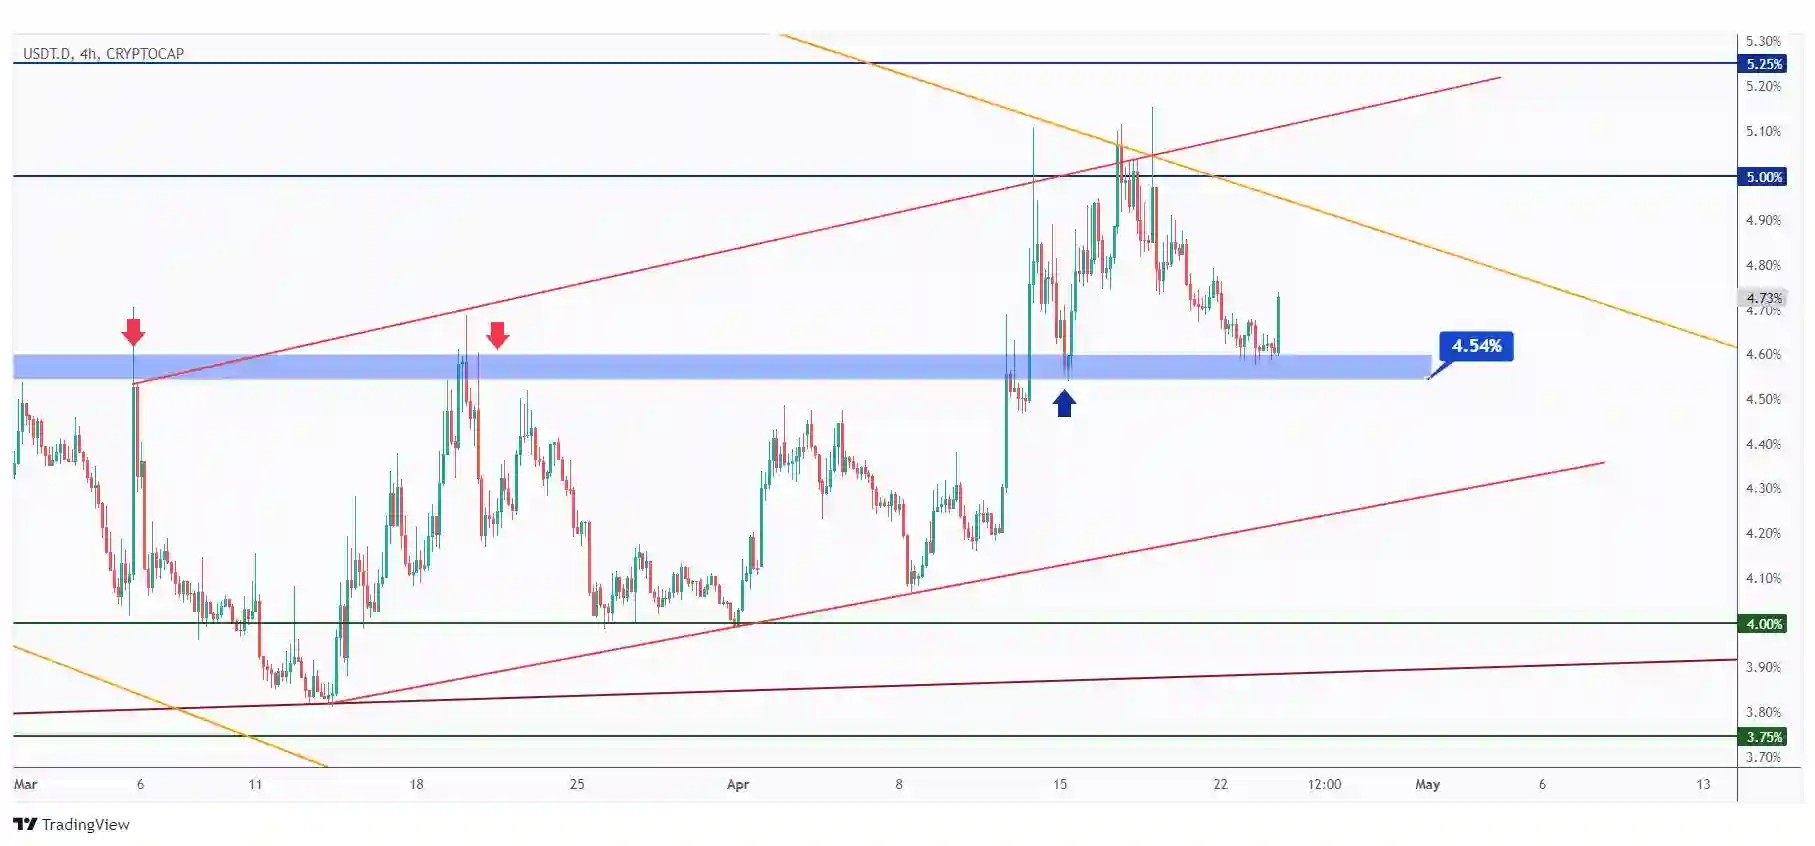 USDT.D 4h chart hovering around a strong structure at 4.54%. As long as the 4.54% holds, we expect further bullish movement.